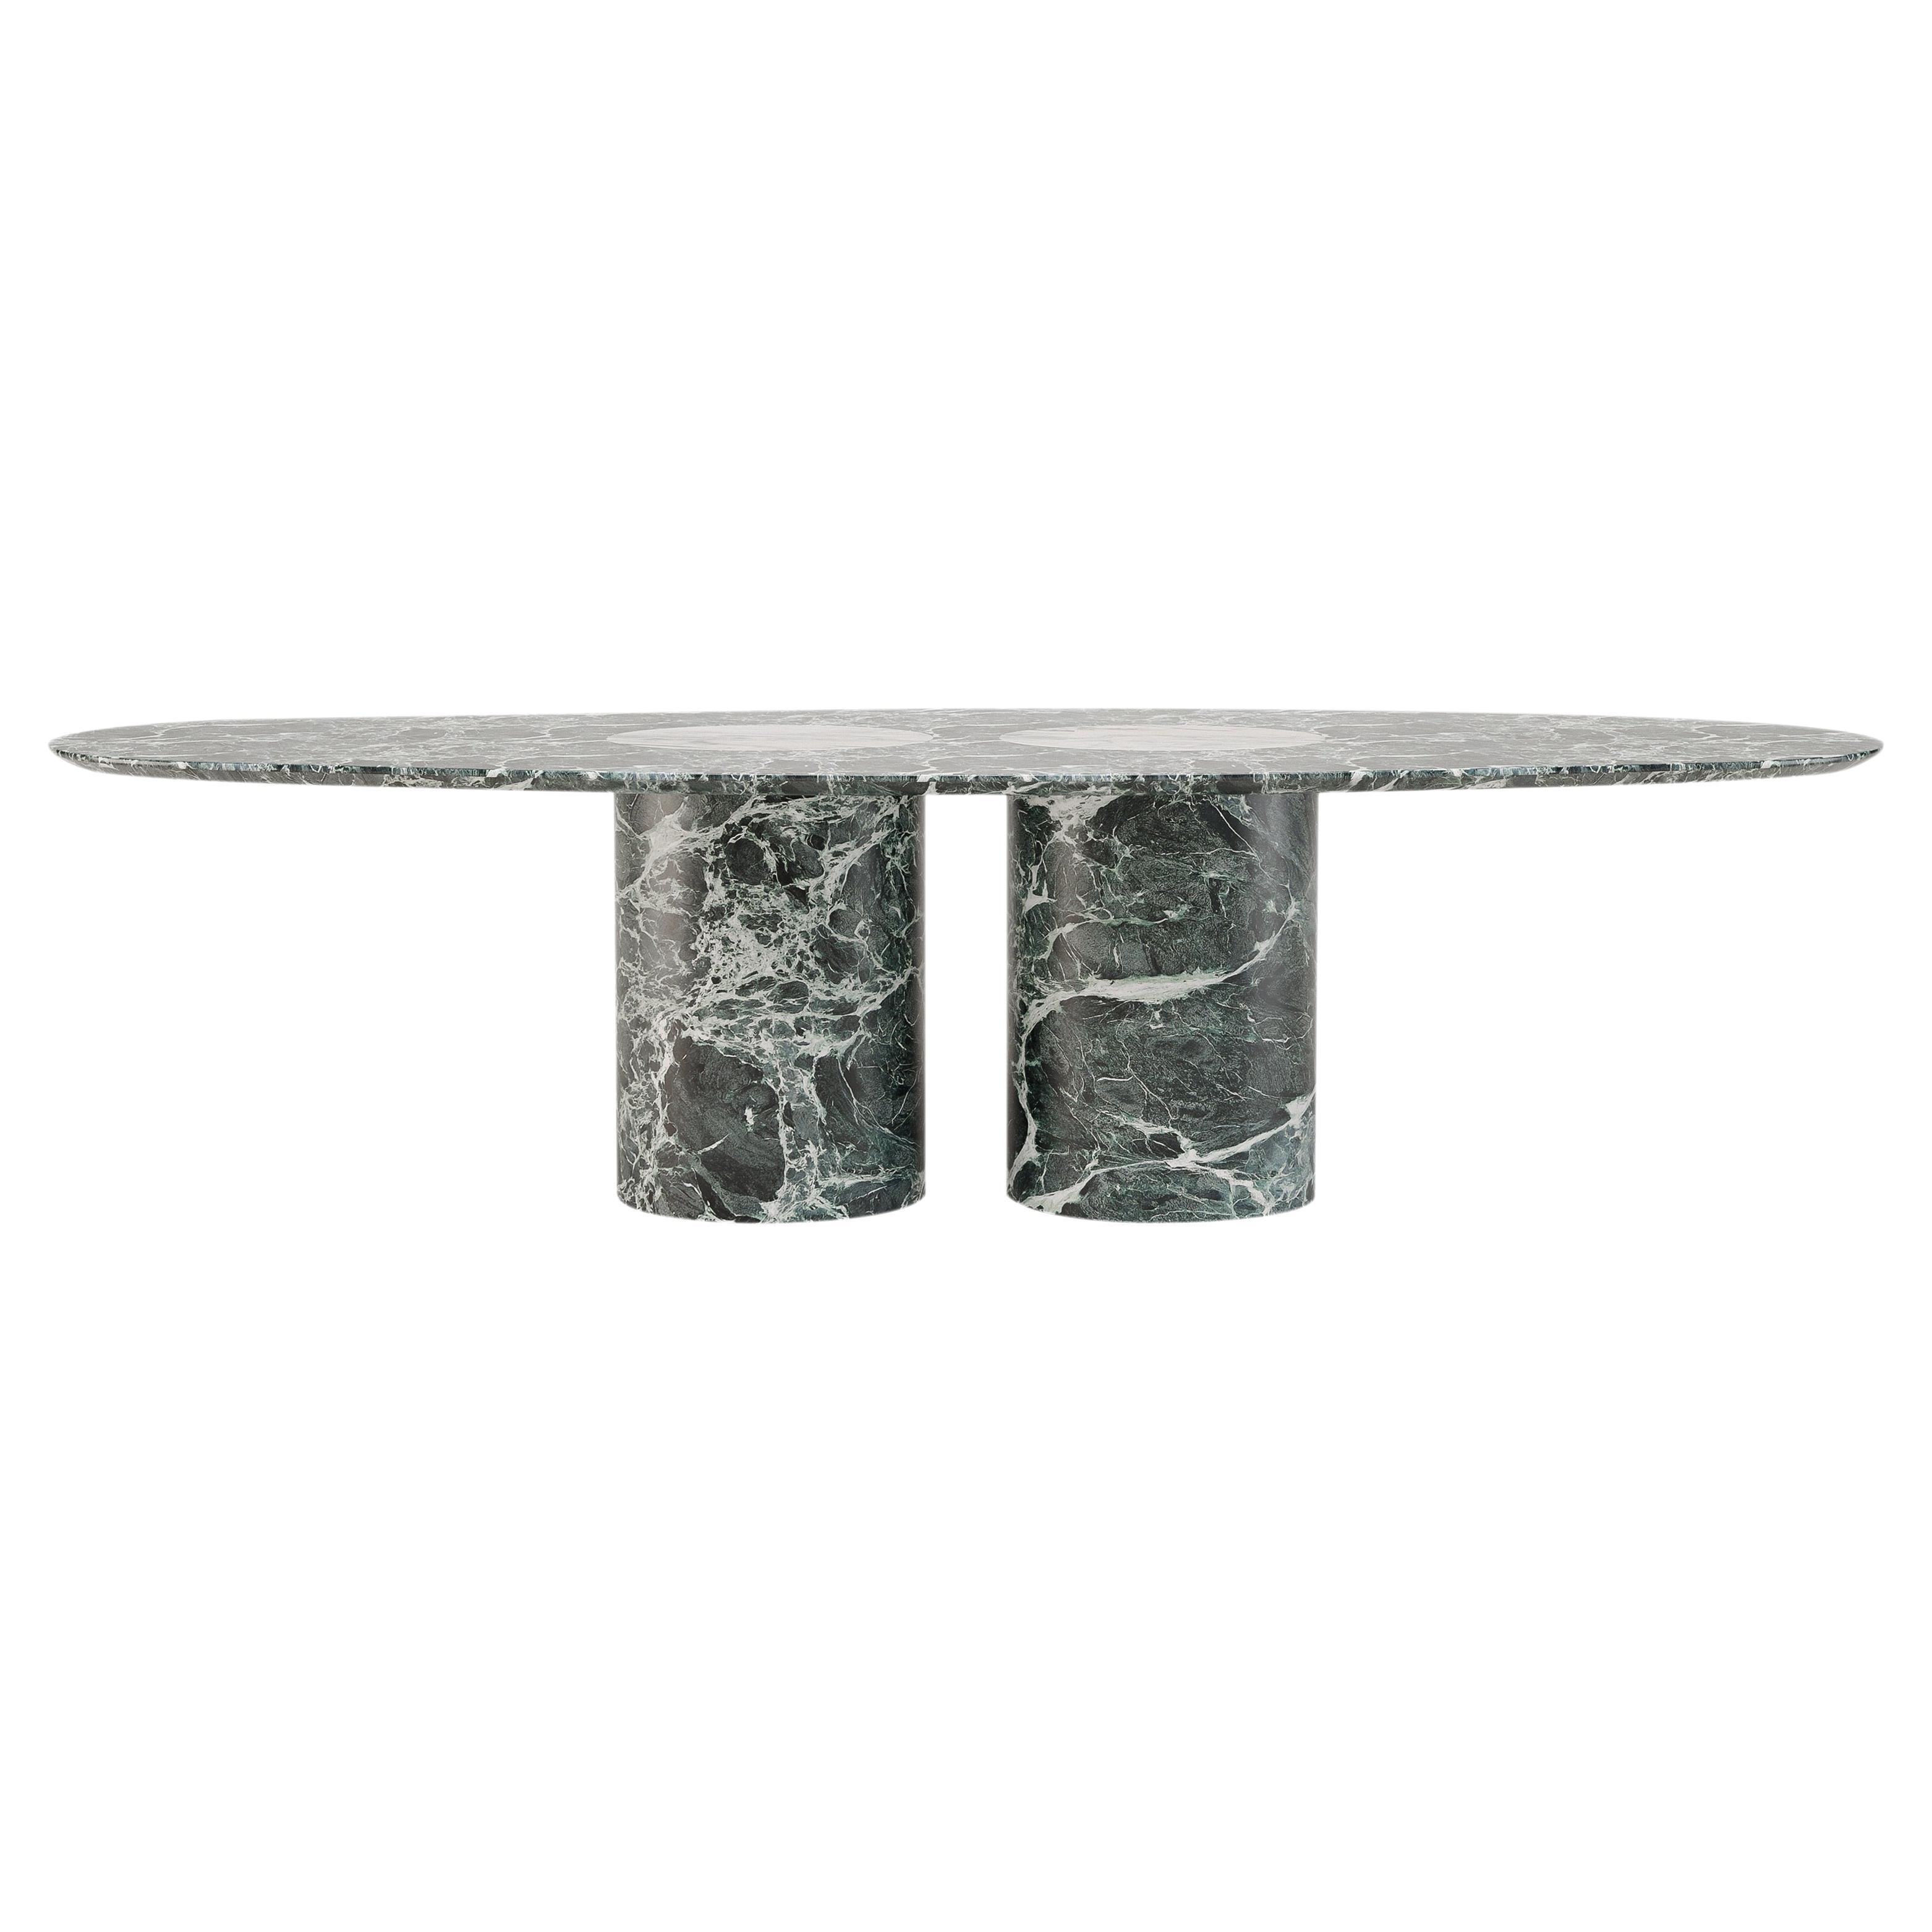 Salvante D1 Dining Table, Bianco Namibia Marble by Piotr Dąbrowa For Sale